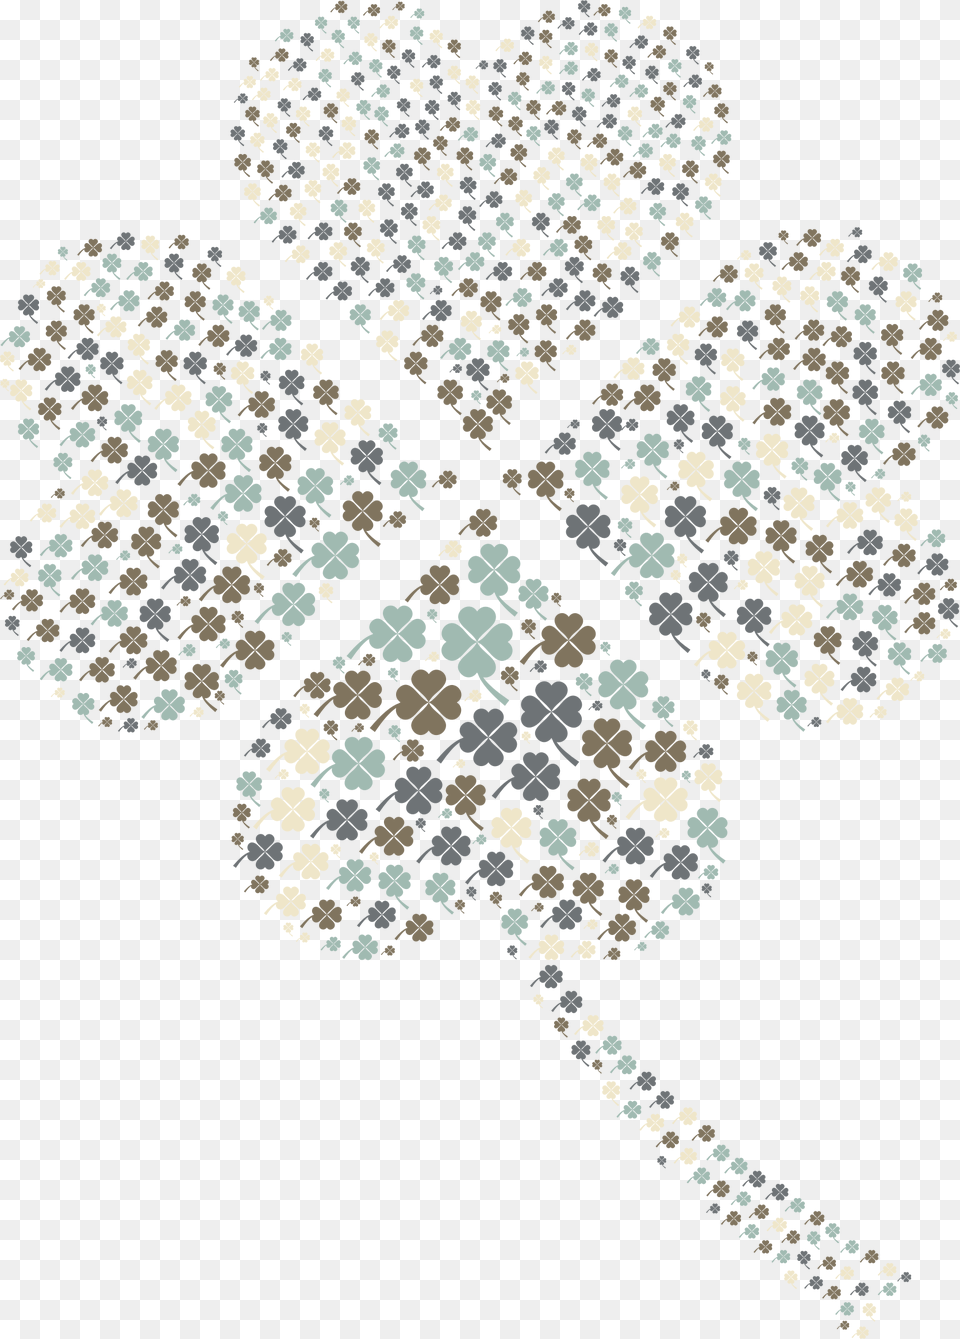 This Icons Design Of Four Leaf Clover Fractal, Accessories, Pattern, Art, Jewelry Free Transparent Png